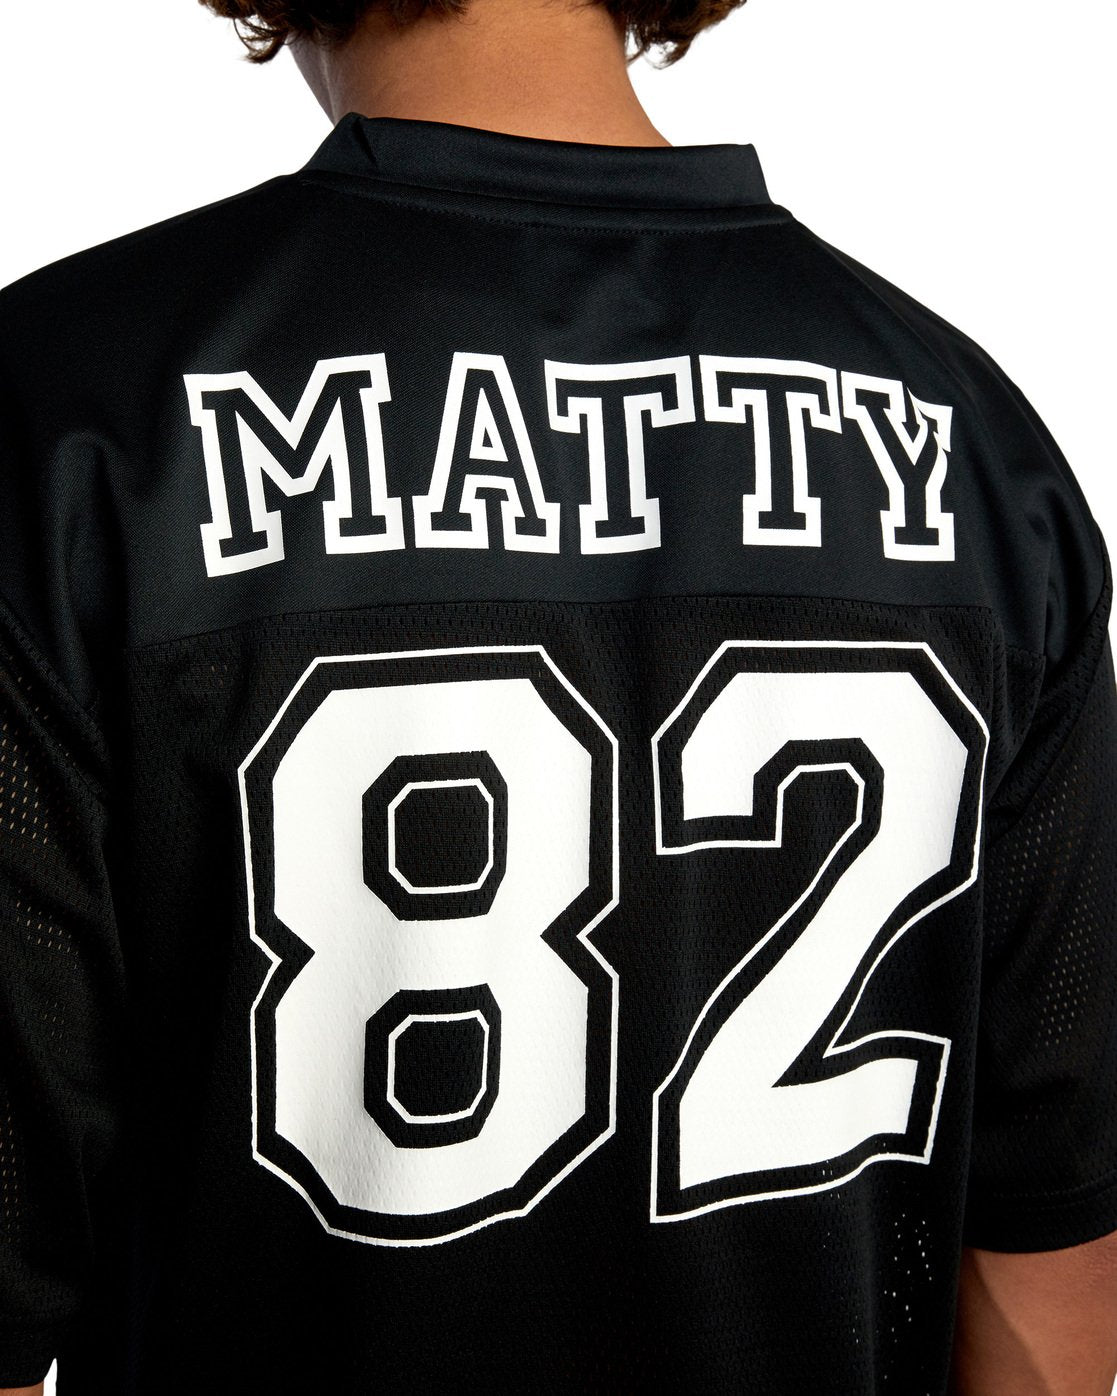 RVCA Matty Practice Jersey for Men Black Front Back